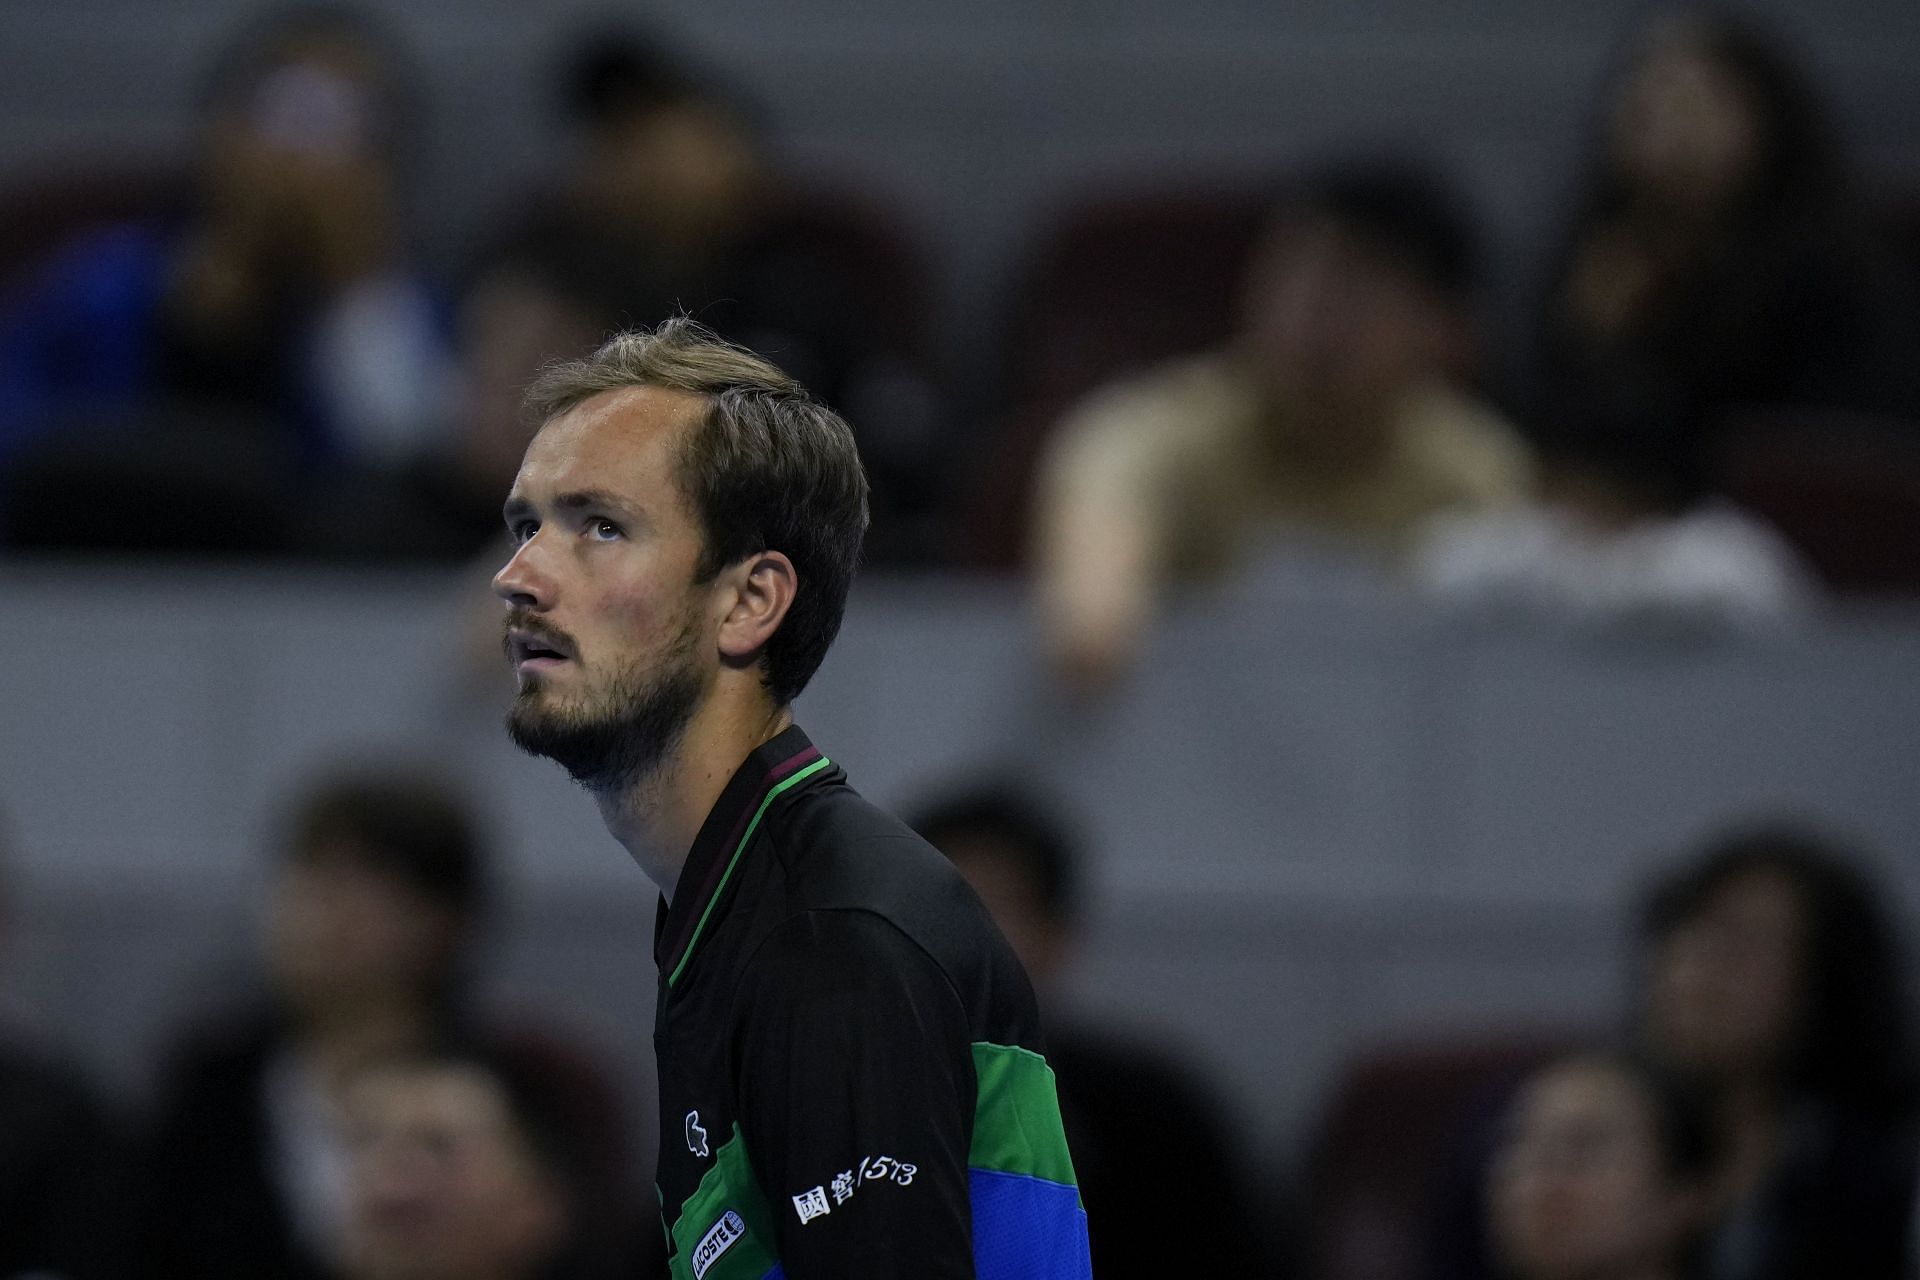 Daniil Medvedev at the 2023 China Open